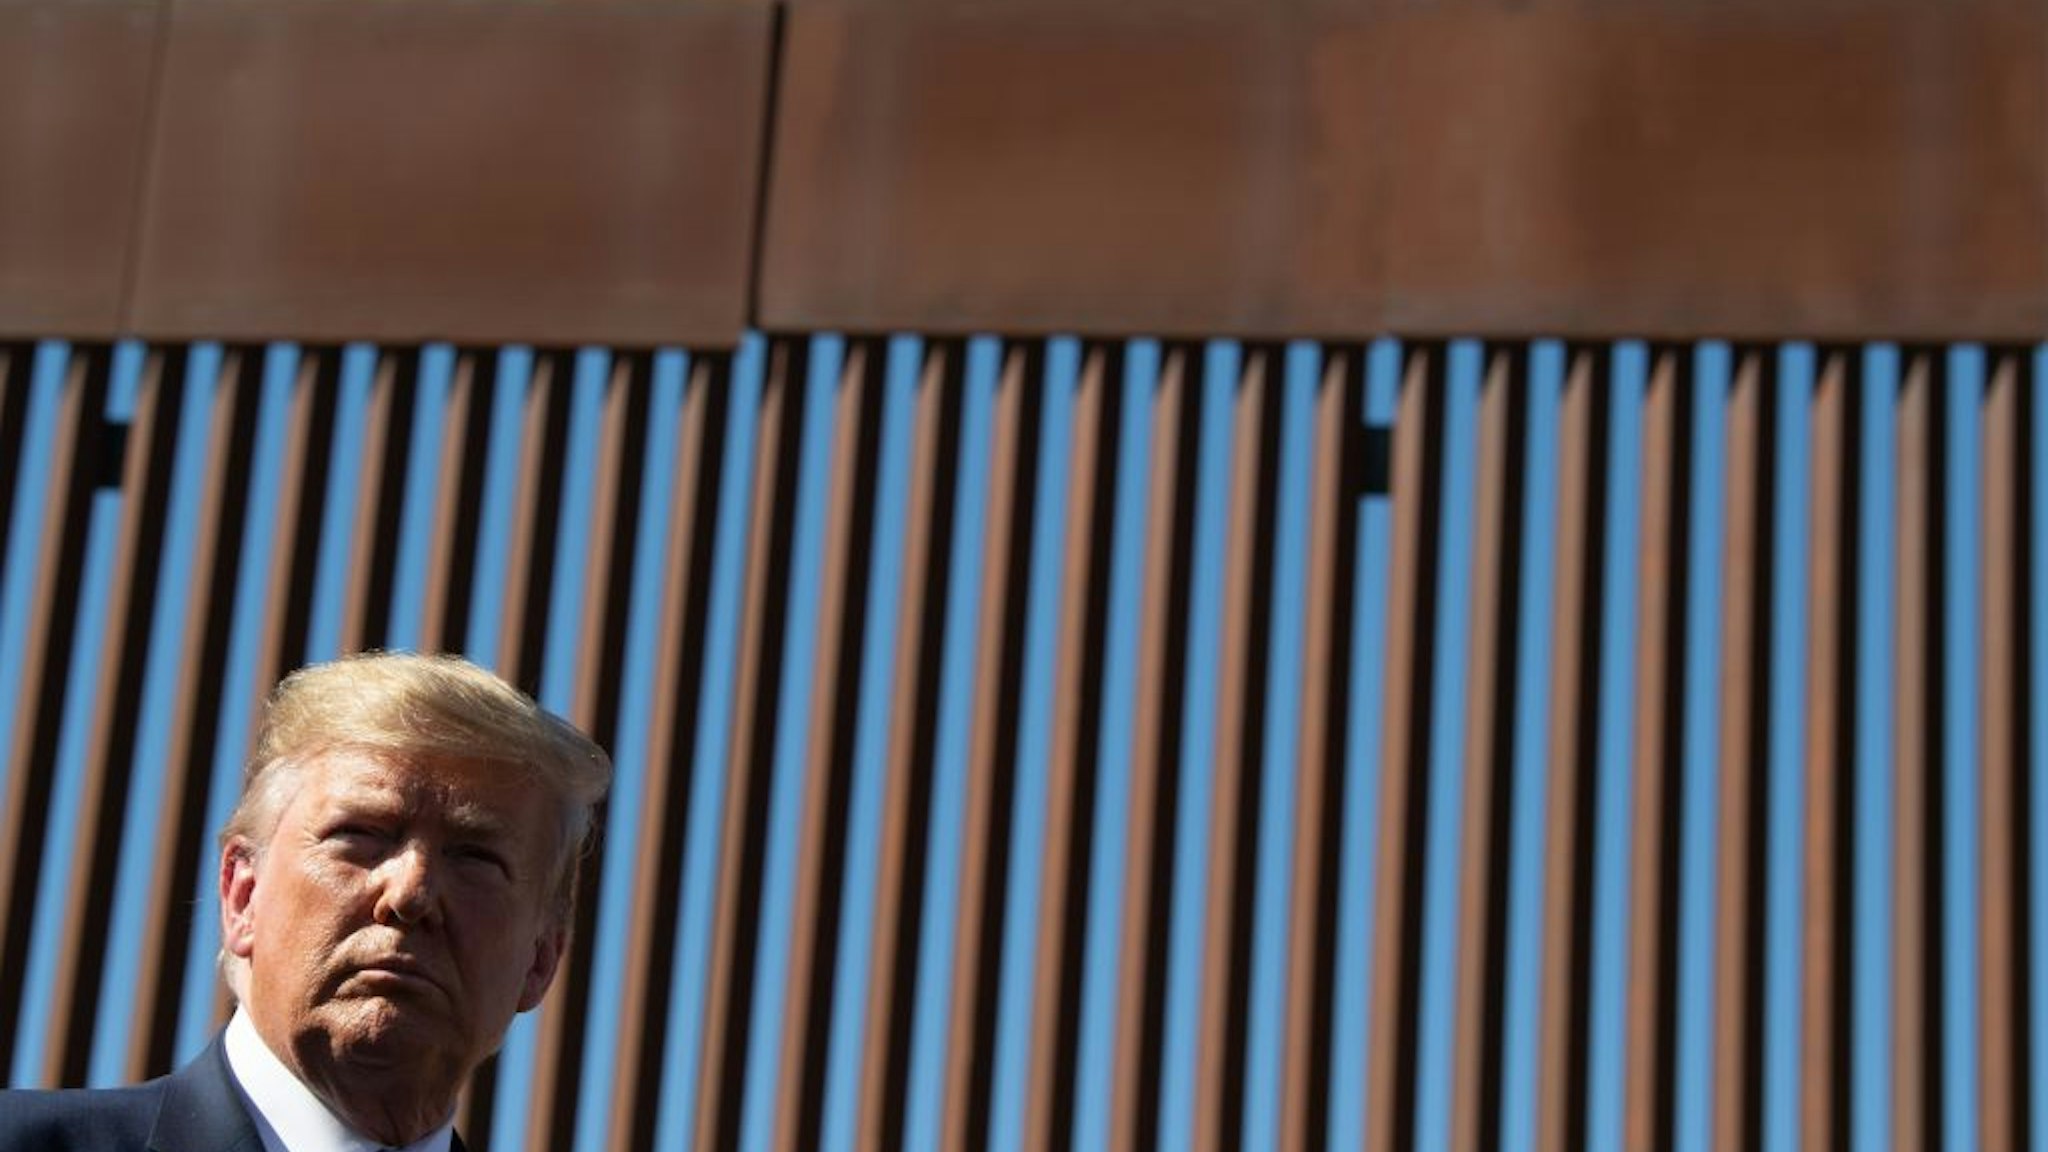 US President Donald Trump visits the US-Mexico border fence in Otay Mesa, California on September 18, 2019.